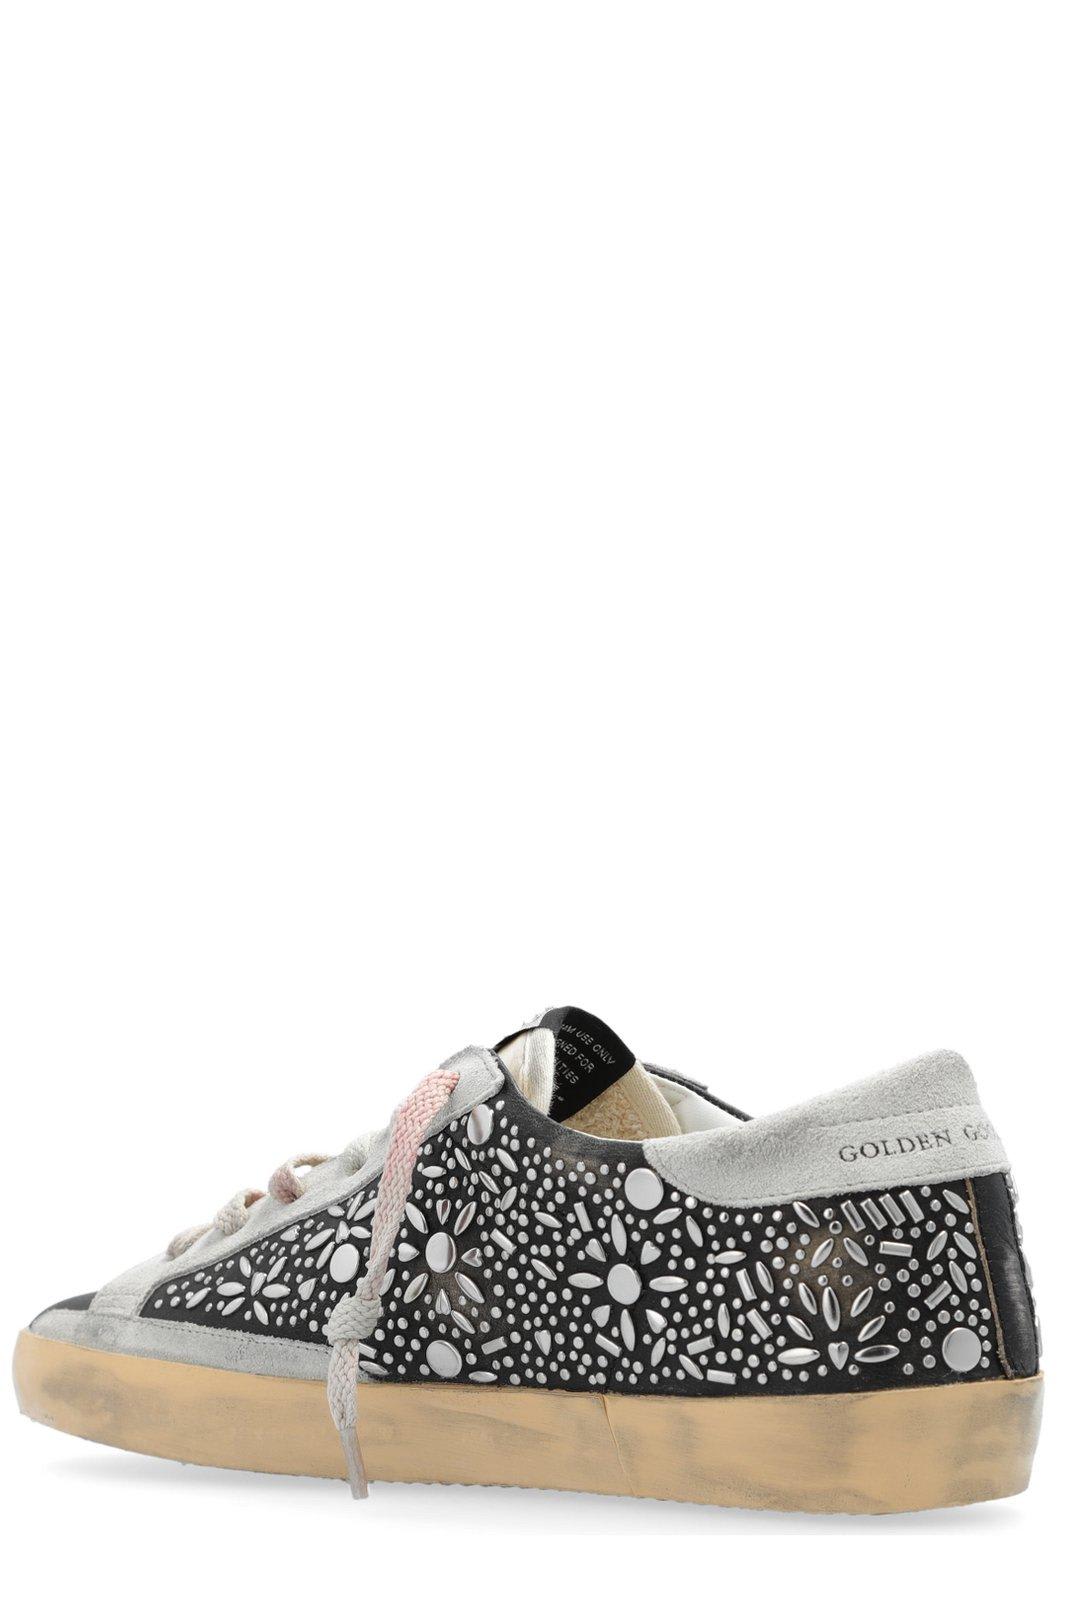 Shop Golden Goose Ball Star Embellished Sneakers In Black/ice